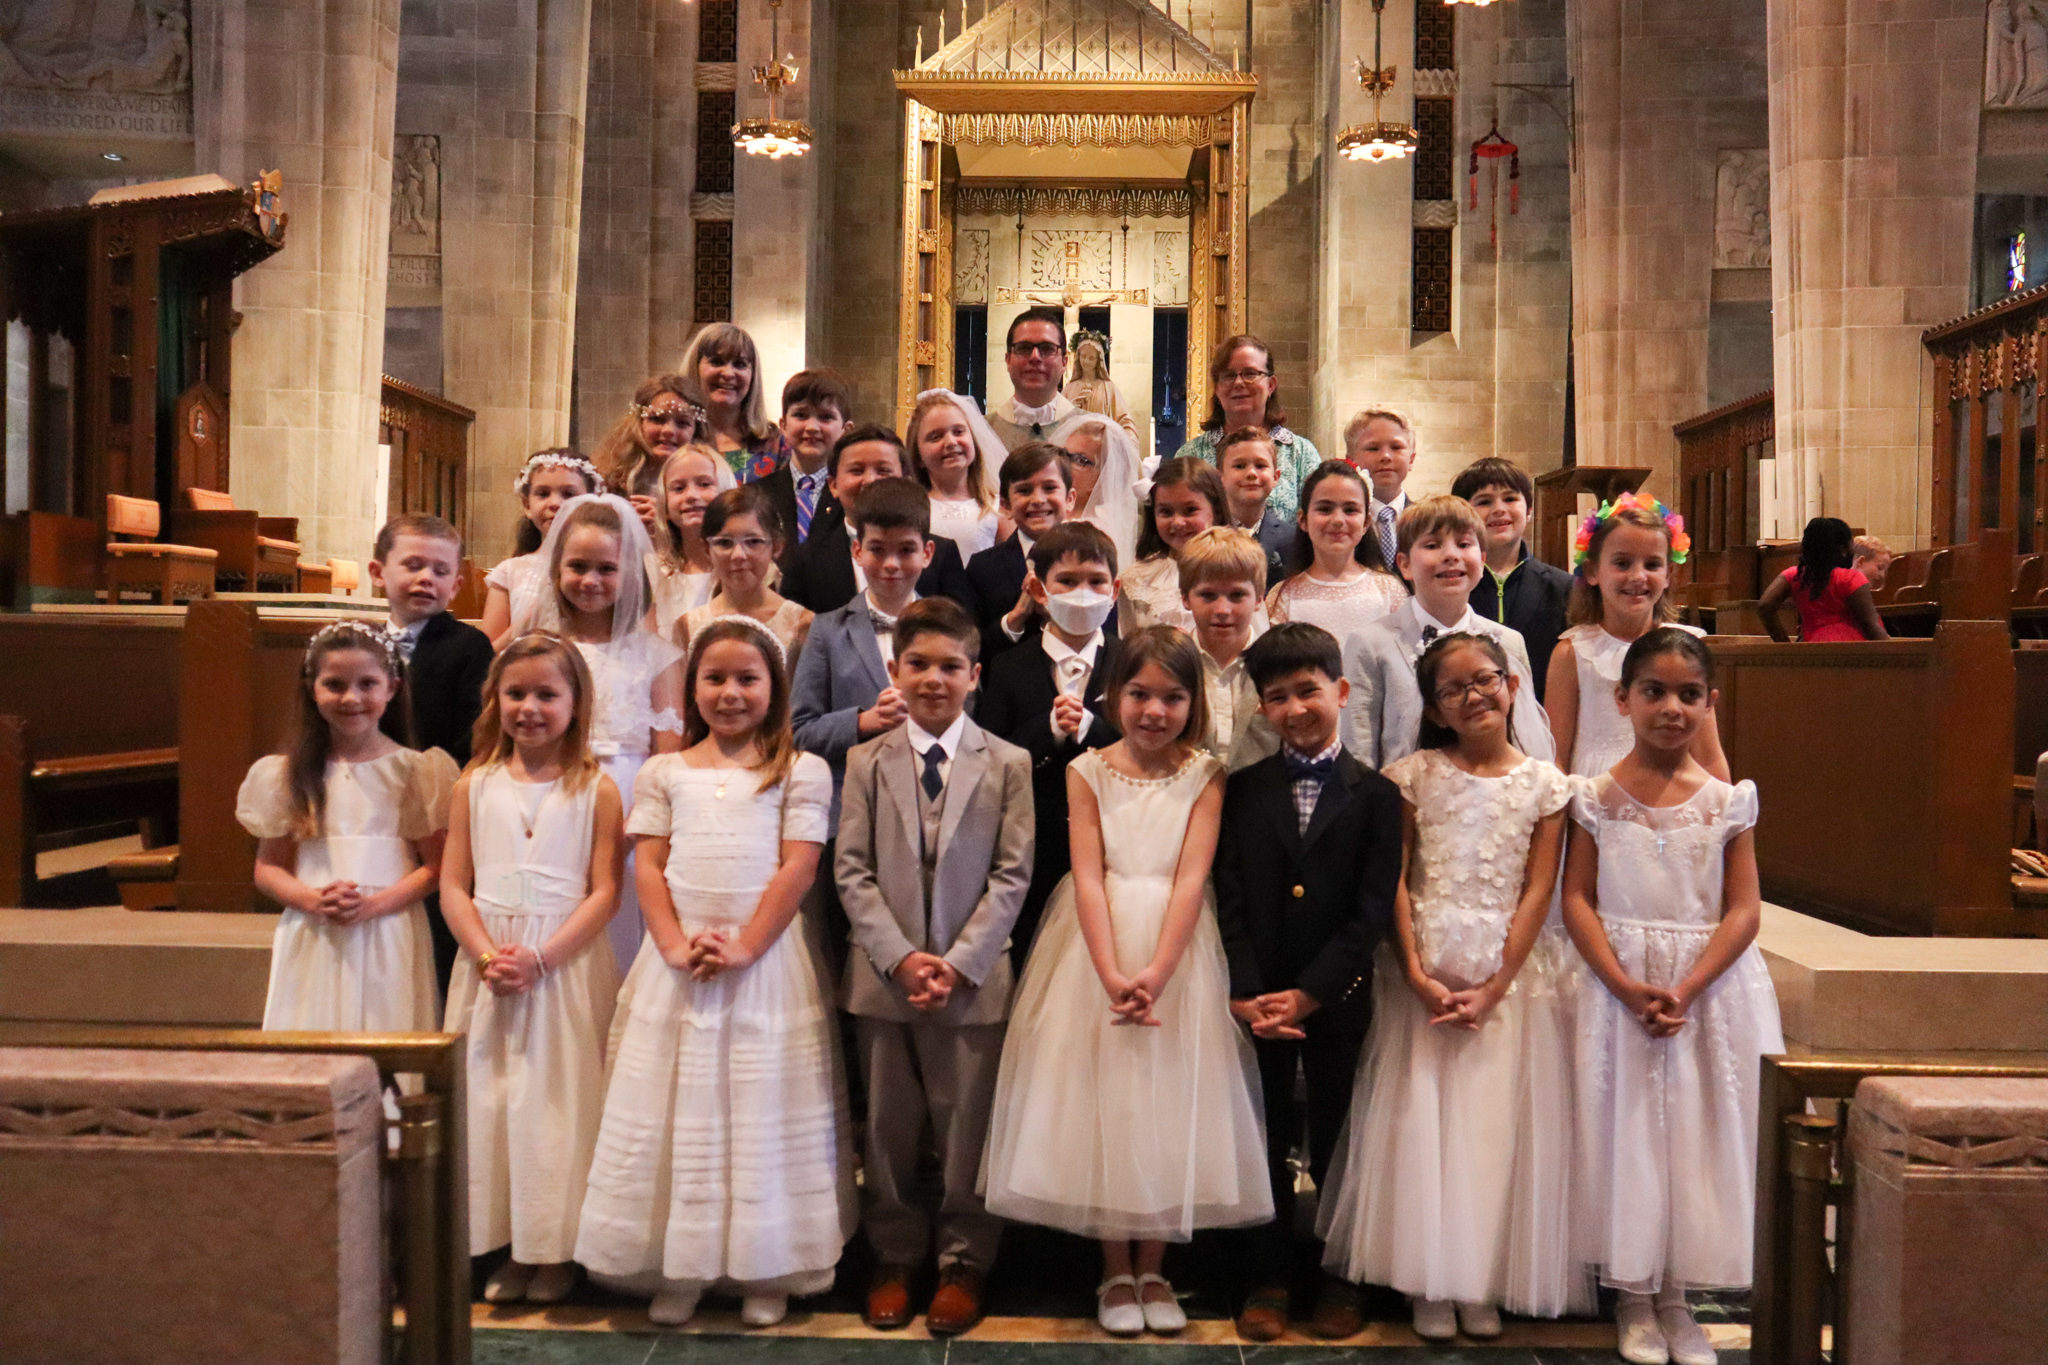 First Communion at School of the Cathedral